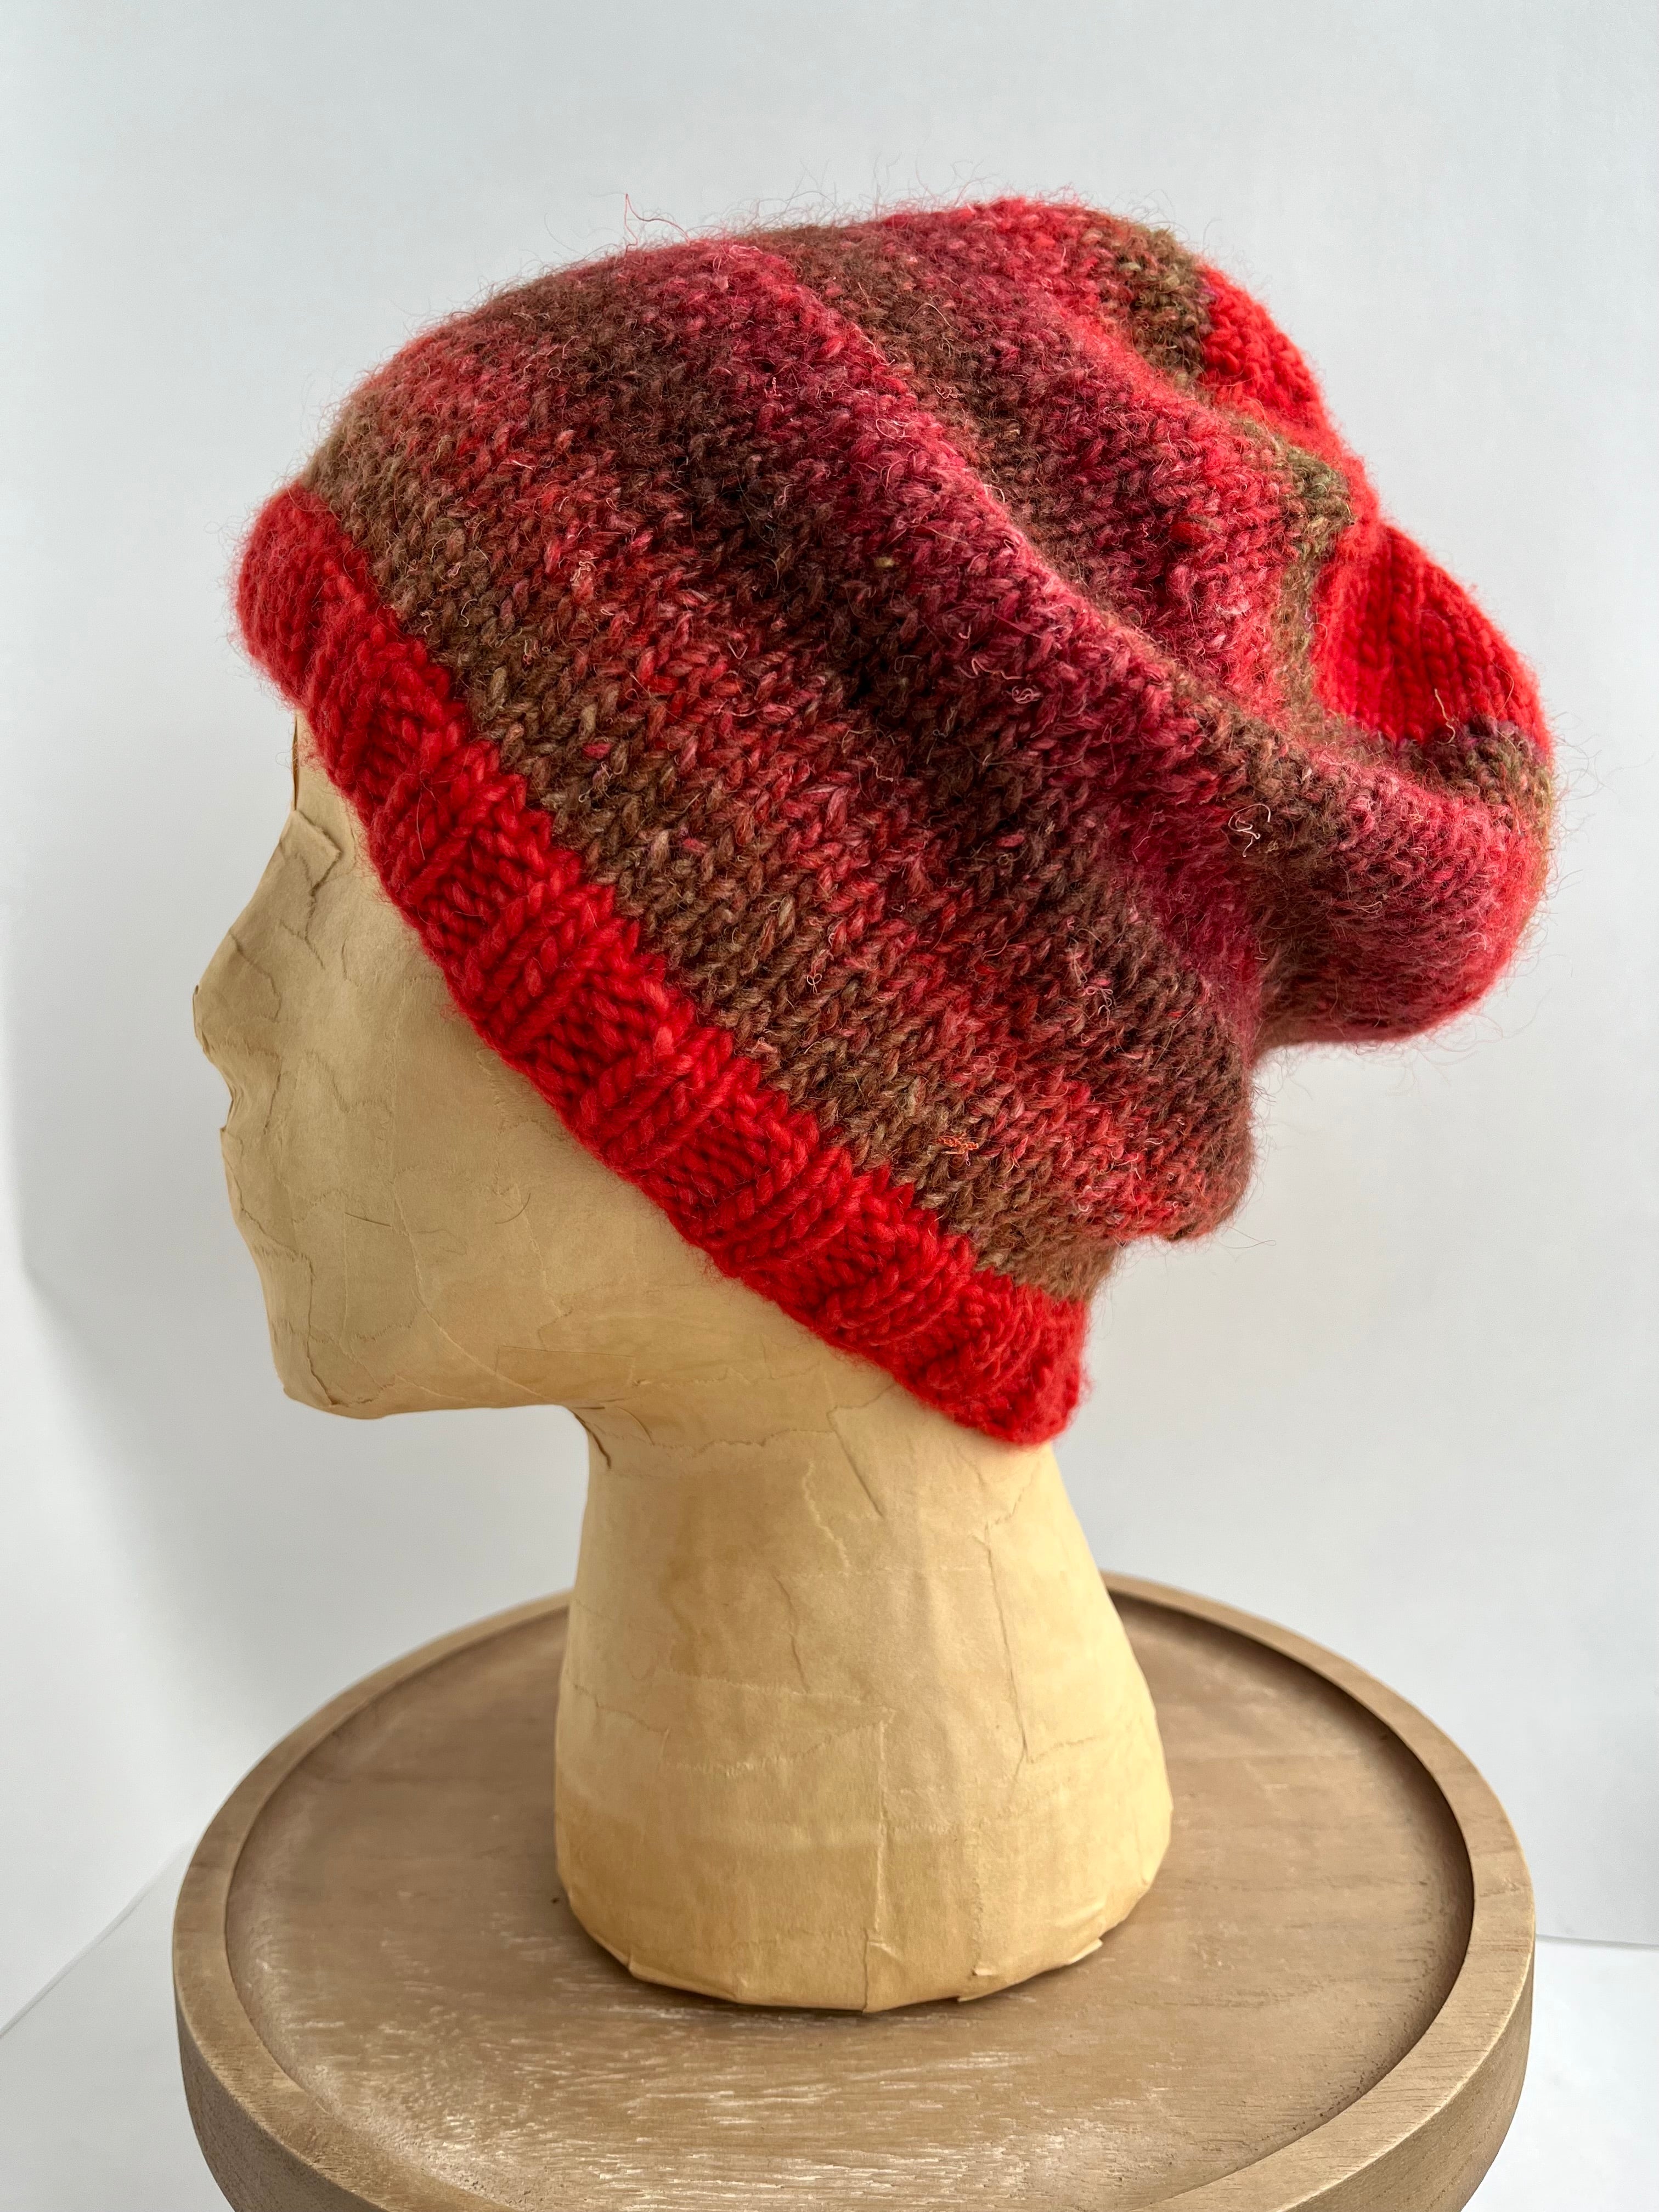 Learn to Knit Series 3, a beanie hat